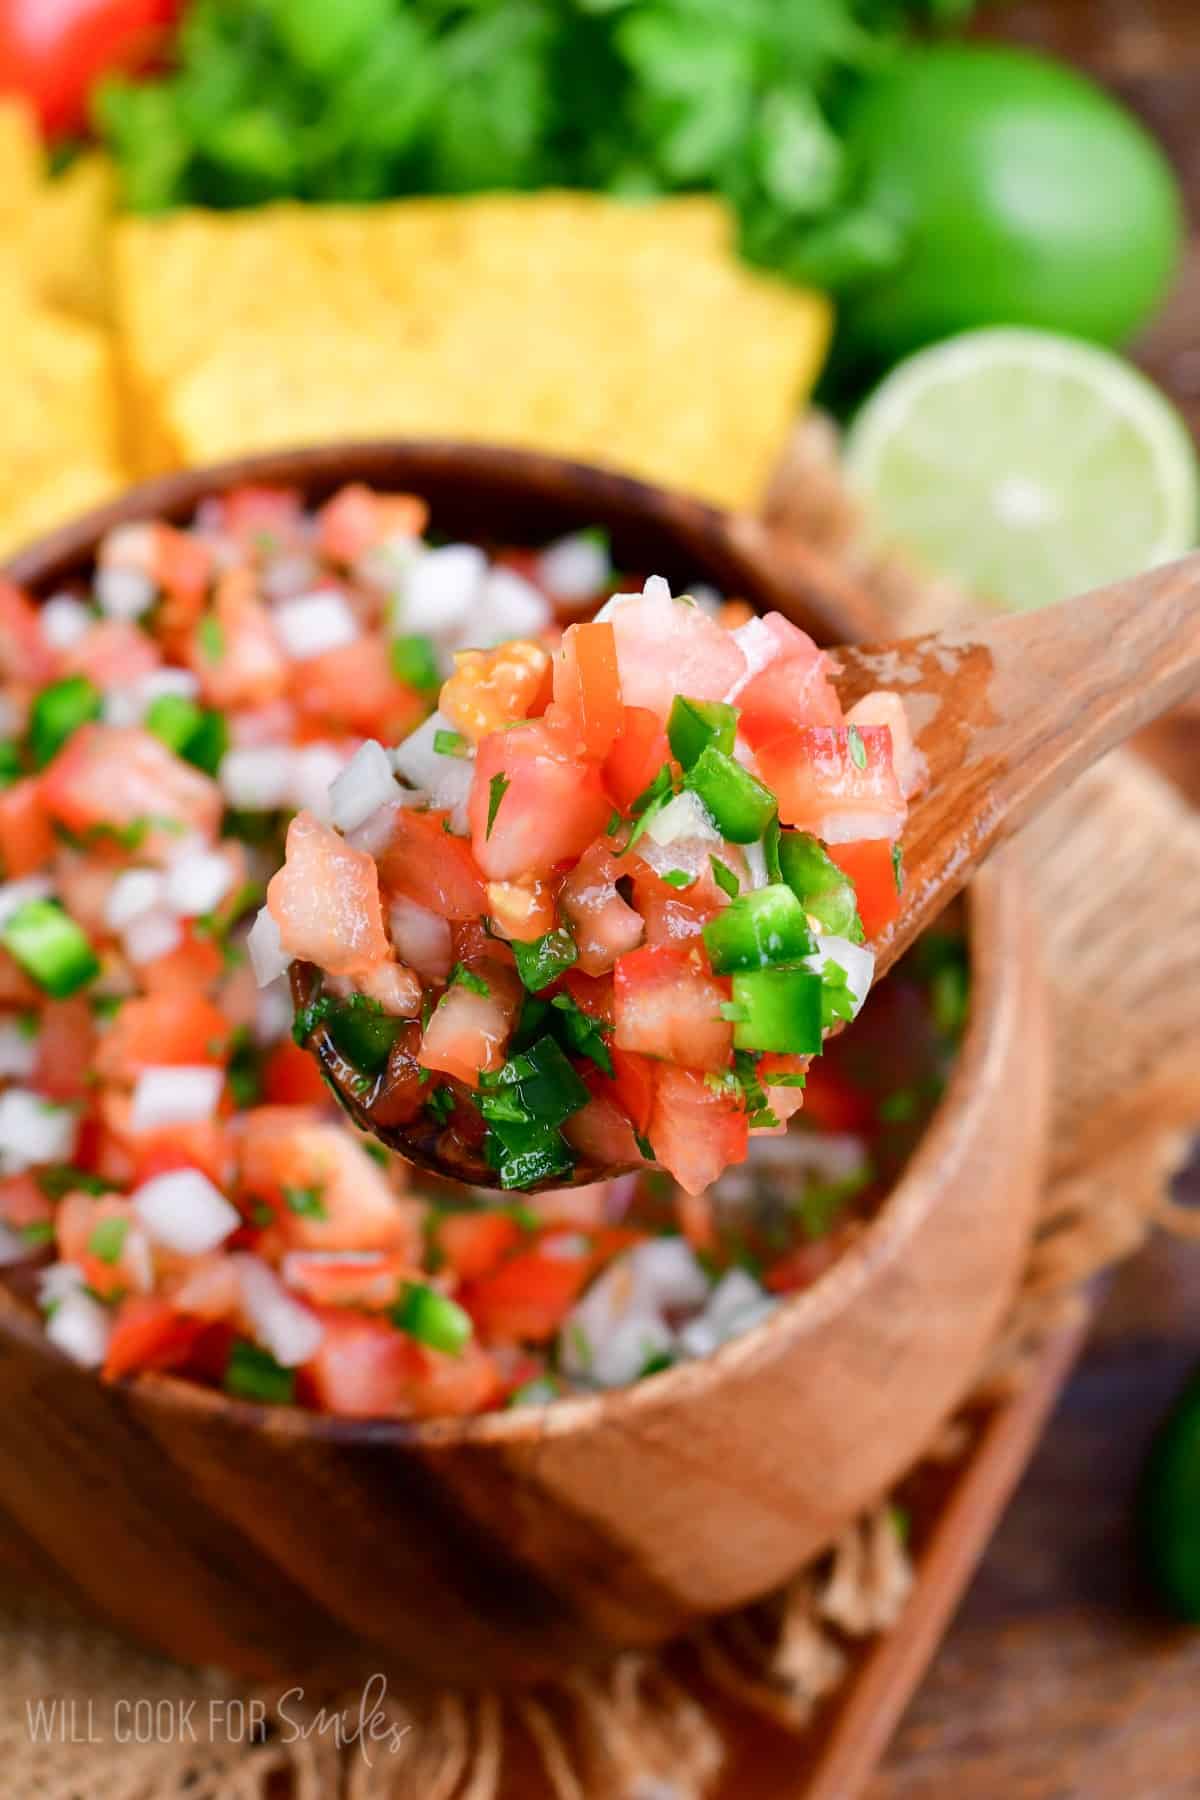 scooping up Pico de Gallo up with a wooden spoon.